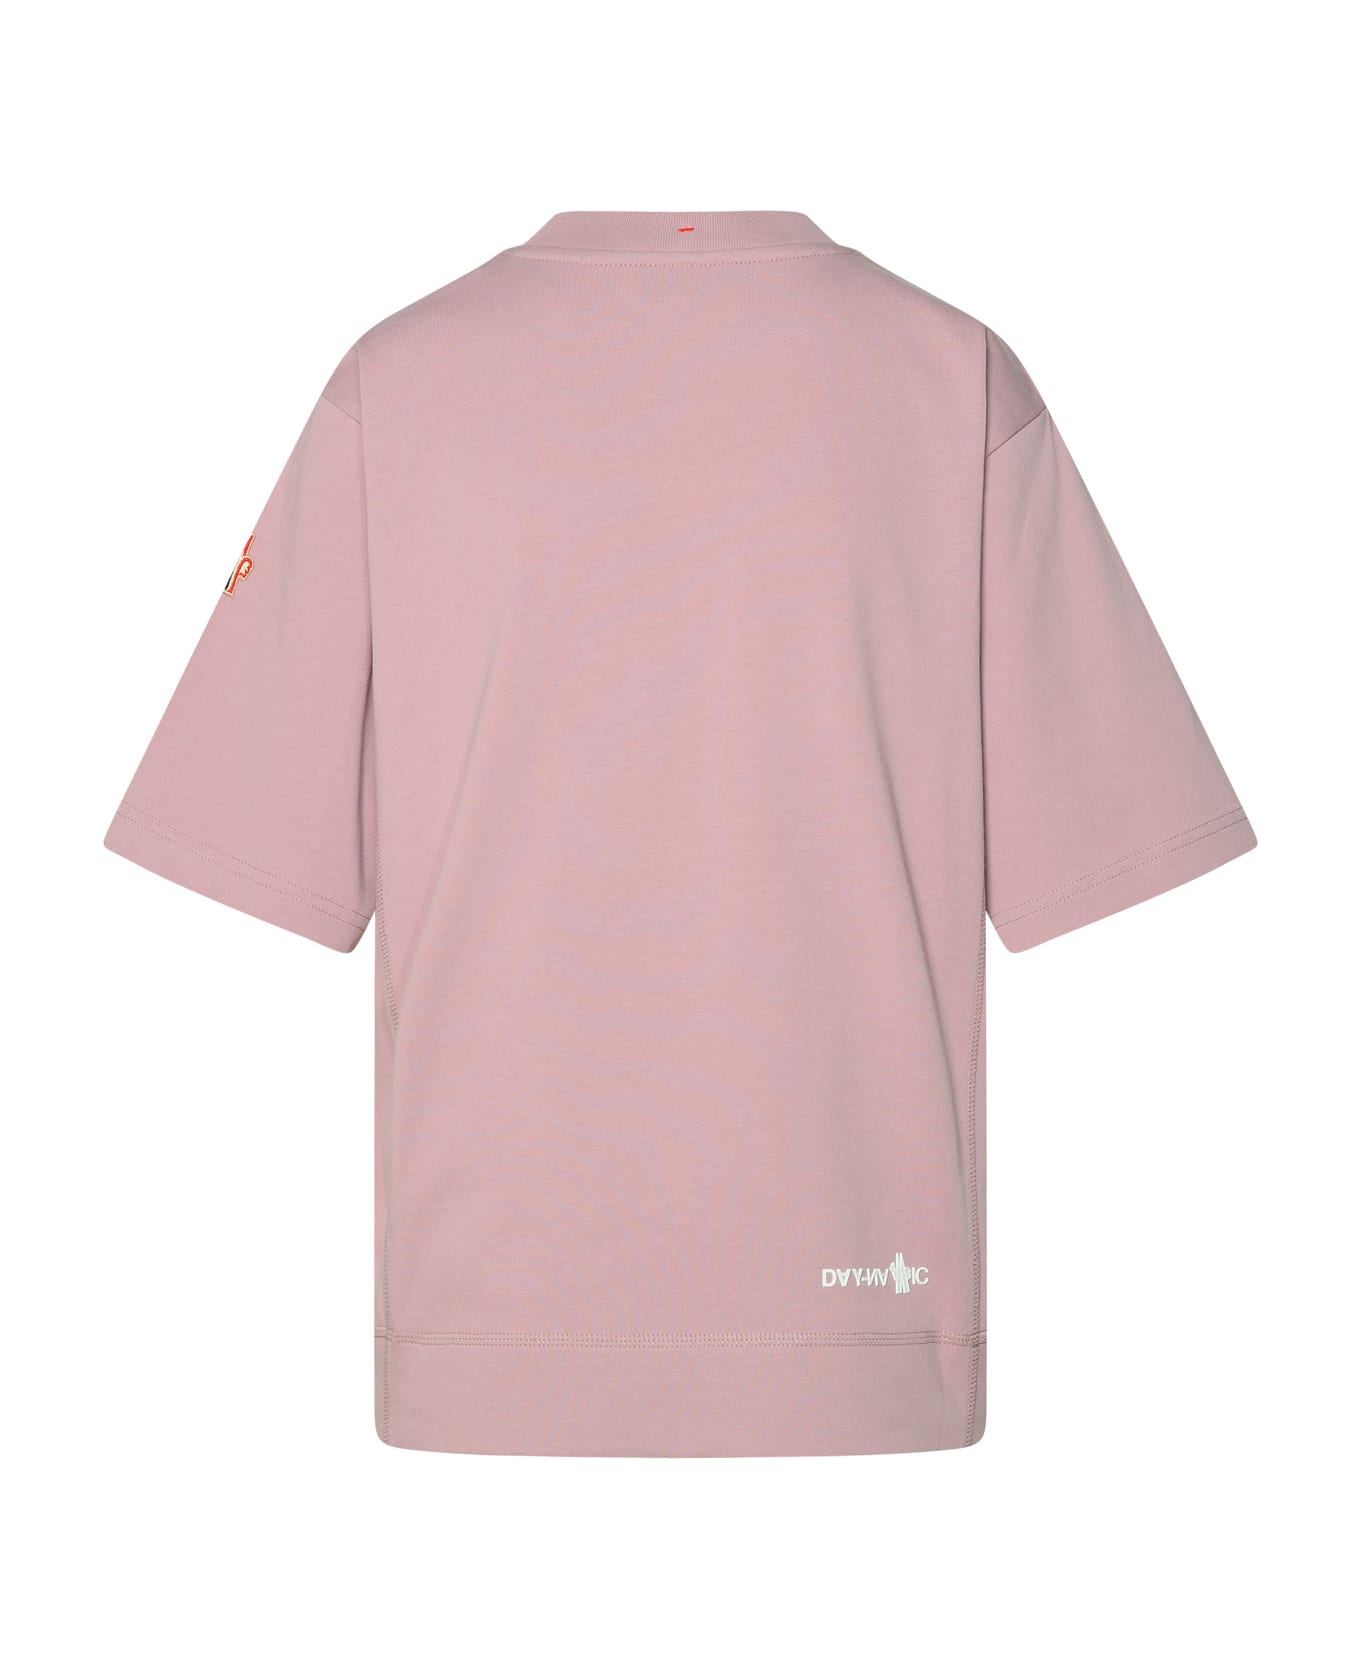 Moncler Grenoble Pink Cotton T-shirt - PINK Tシャツ